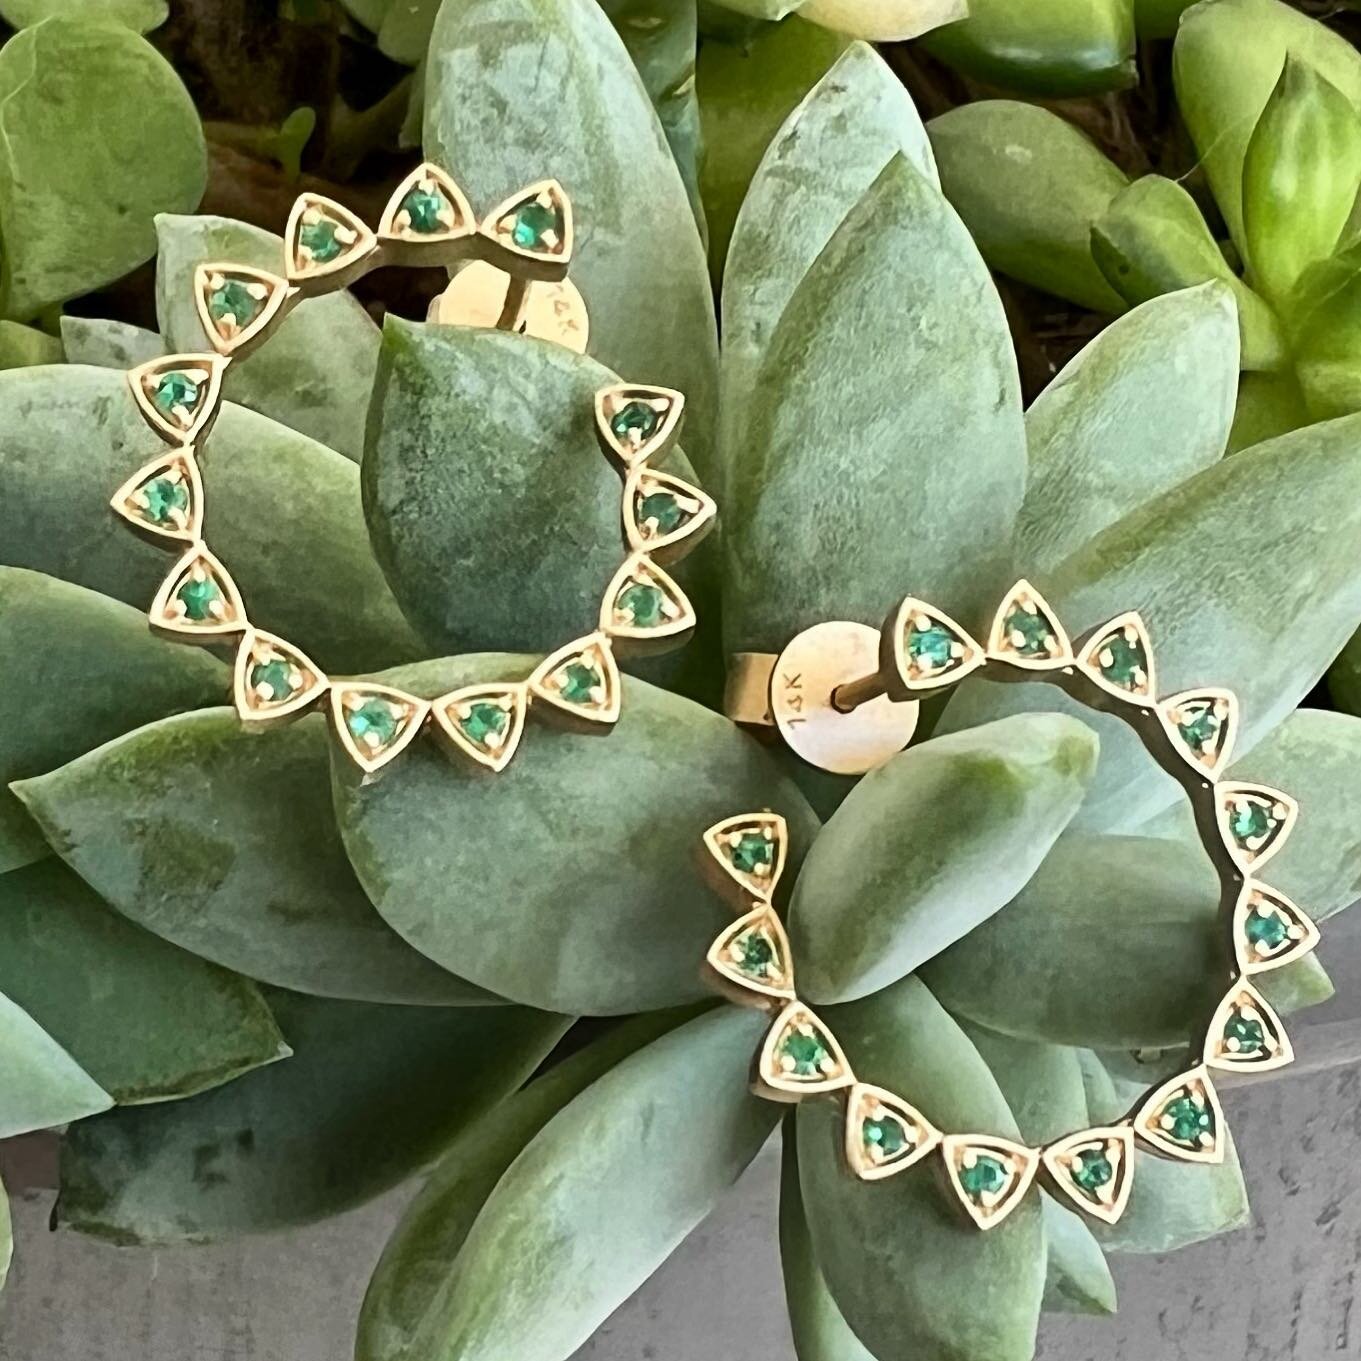 Think GREEN!! 

I'm excited to launch this new collection!

Also available in pink sapphires, or 💎 
.
.
.
.
#emerald #emeraldjewelry #hoops #gold #everydayjewelry #fashion #finejewelry #jewelryaddict #addictedtojewelry #earcandy #earringsoftheday #f